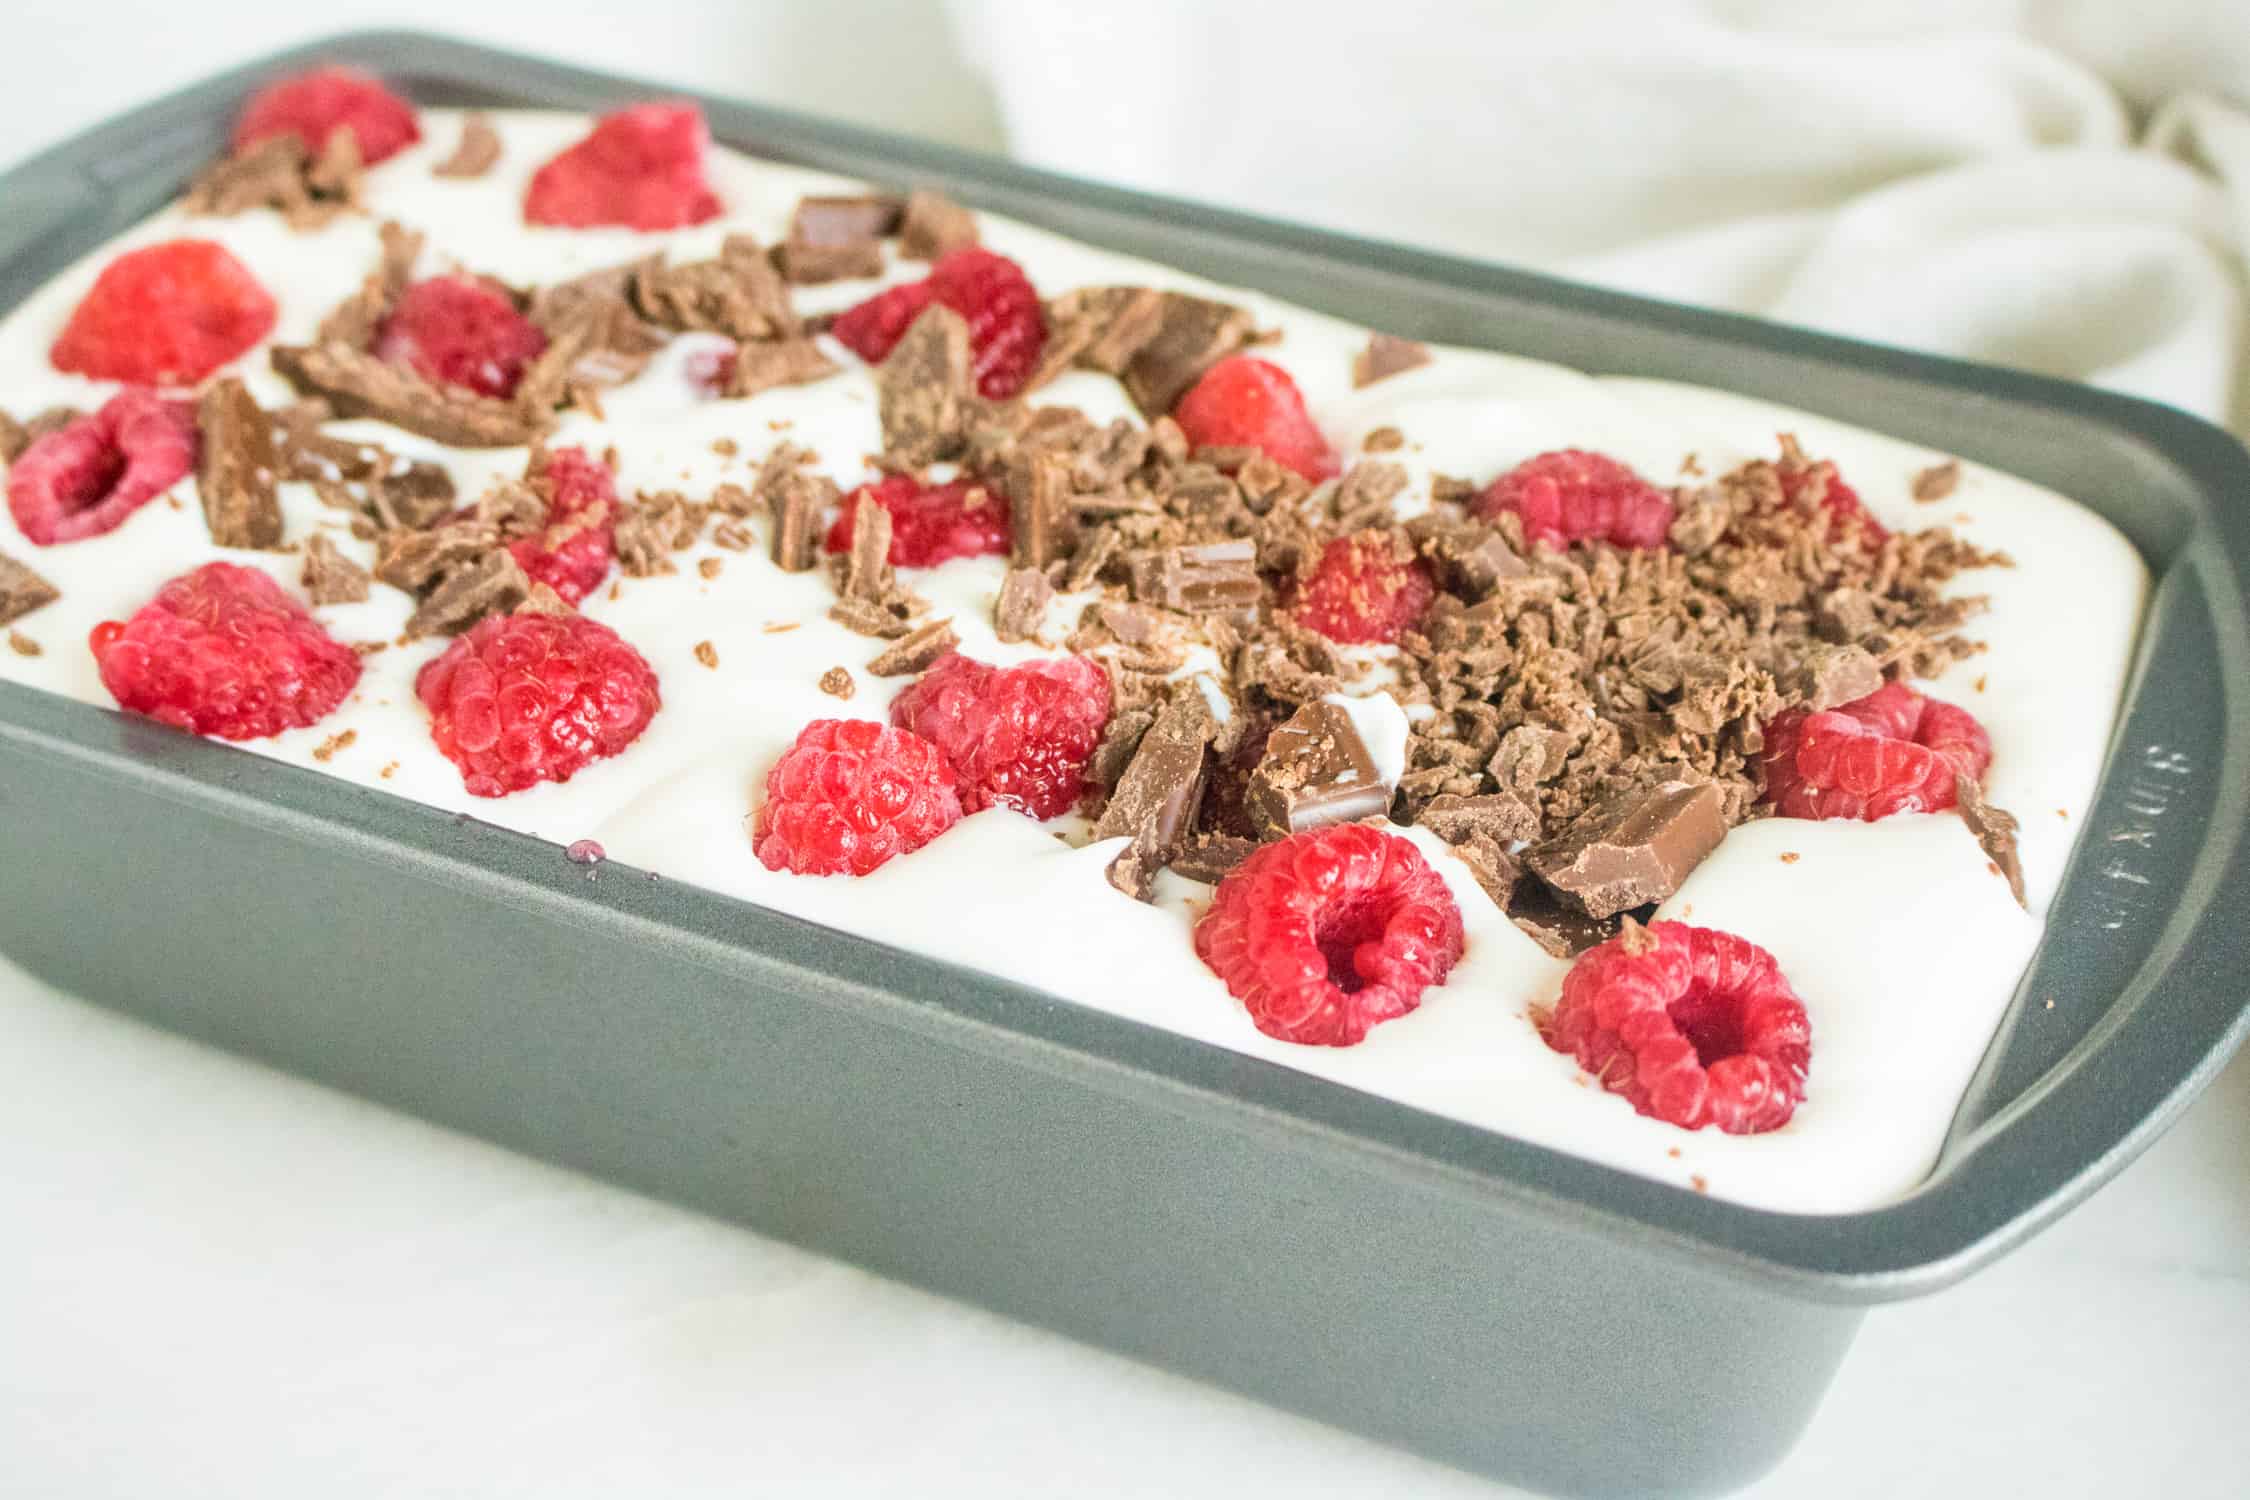 silver loaf pan filled with Raspberry Chocolate Chunk No-Churn Ice Cream base with fresh raspberries and chocolate chunks on top